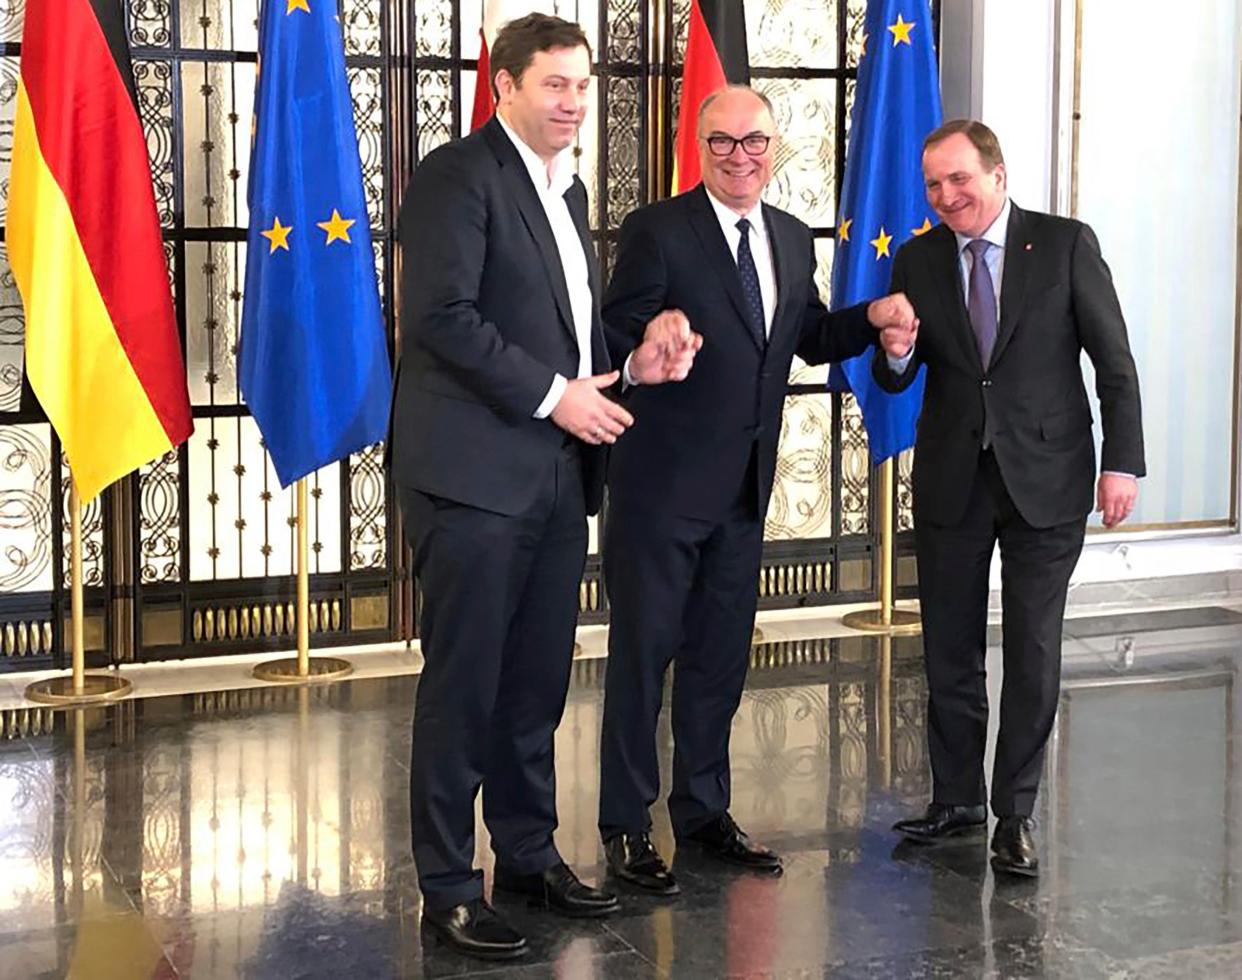 Leaders of social democracy parties, Wlodzimierz Czarzasty of Poland, center, Lars Klingbeil of Germany, left, and President of the Party of European Socialists, former Swedish prime minister, Stefan Löfven, right. (Copyright 2023 The Associated Press. All rights reserved)